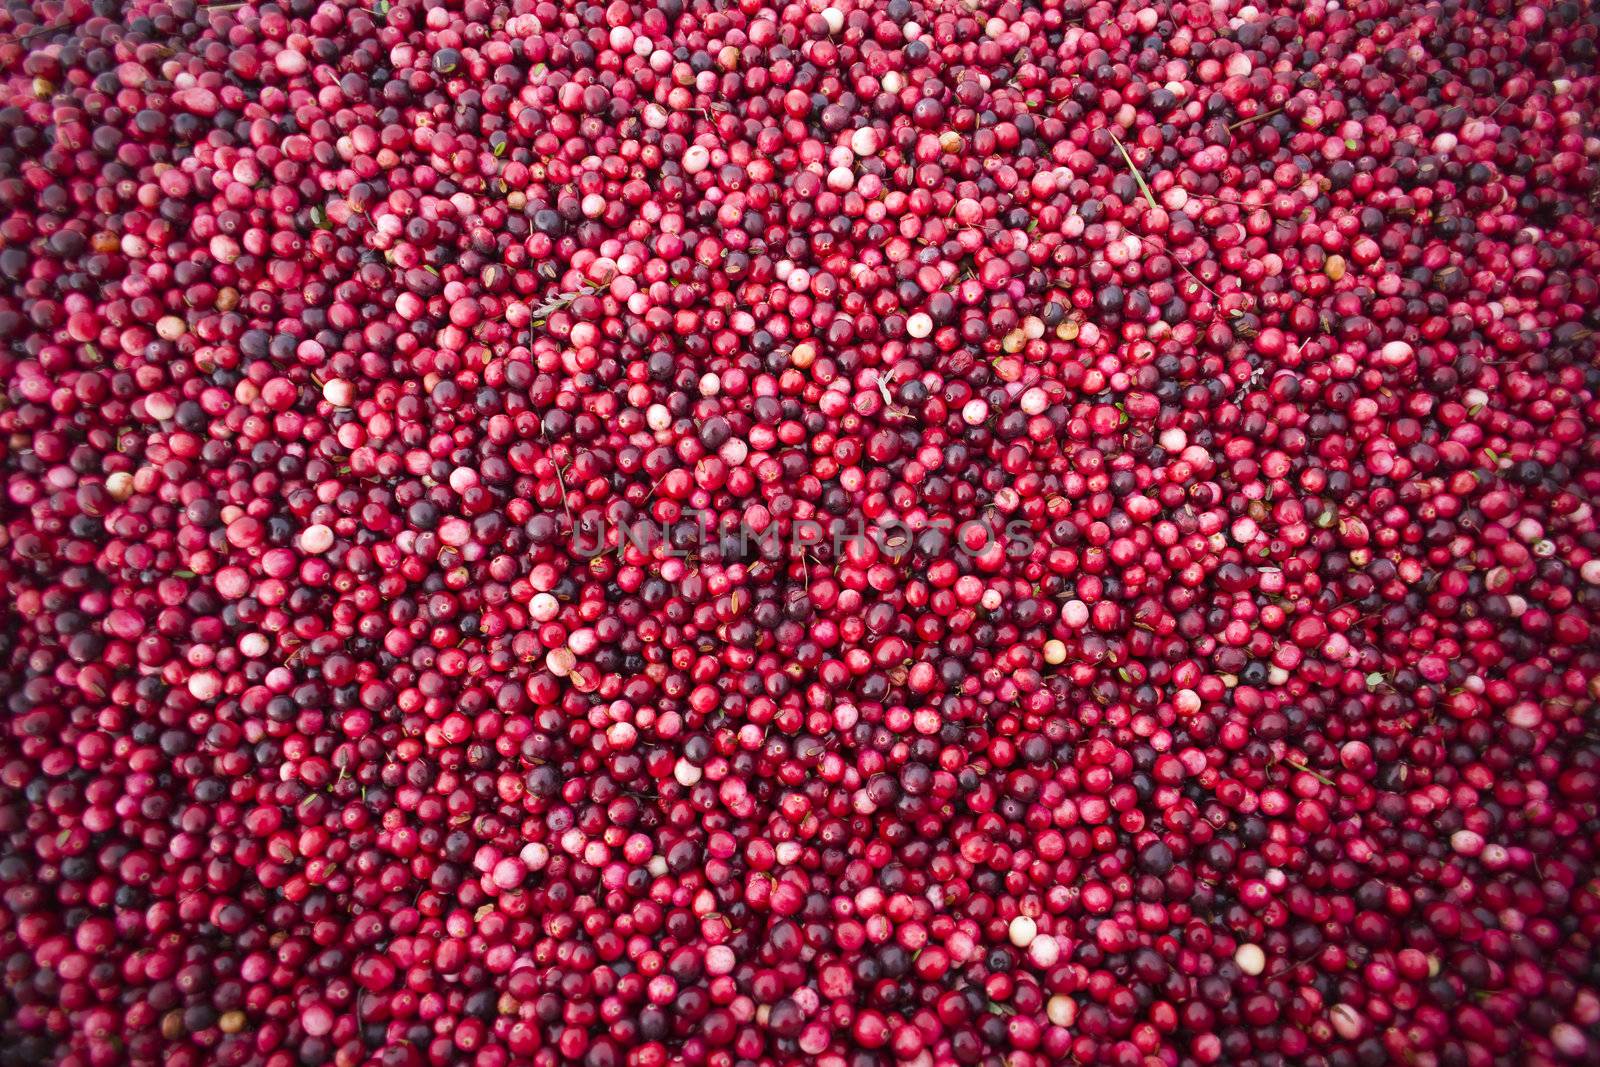 Cranberries just out of the bog on the back of the truck